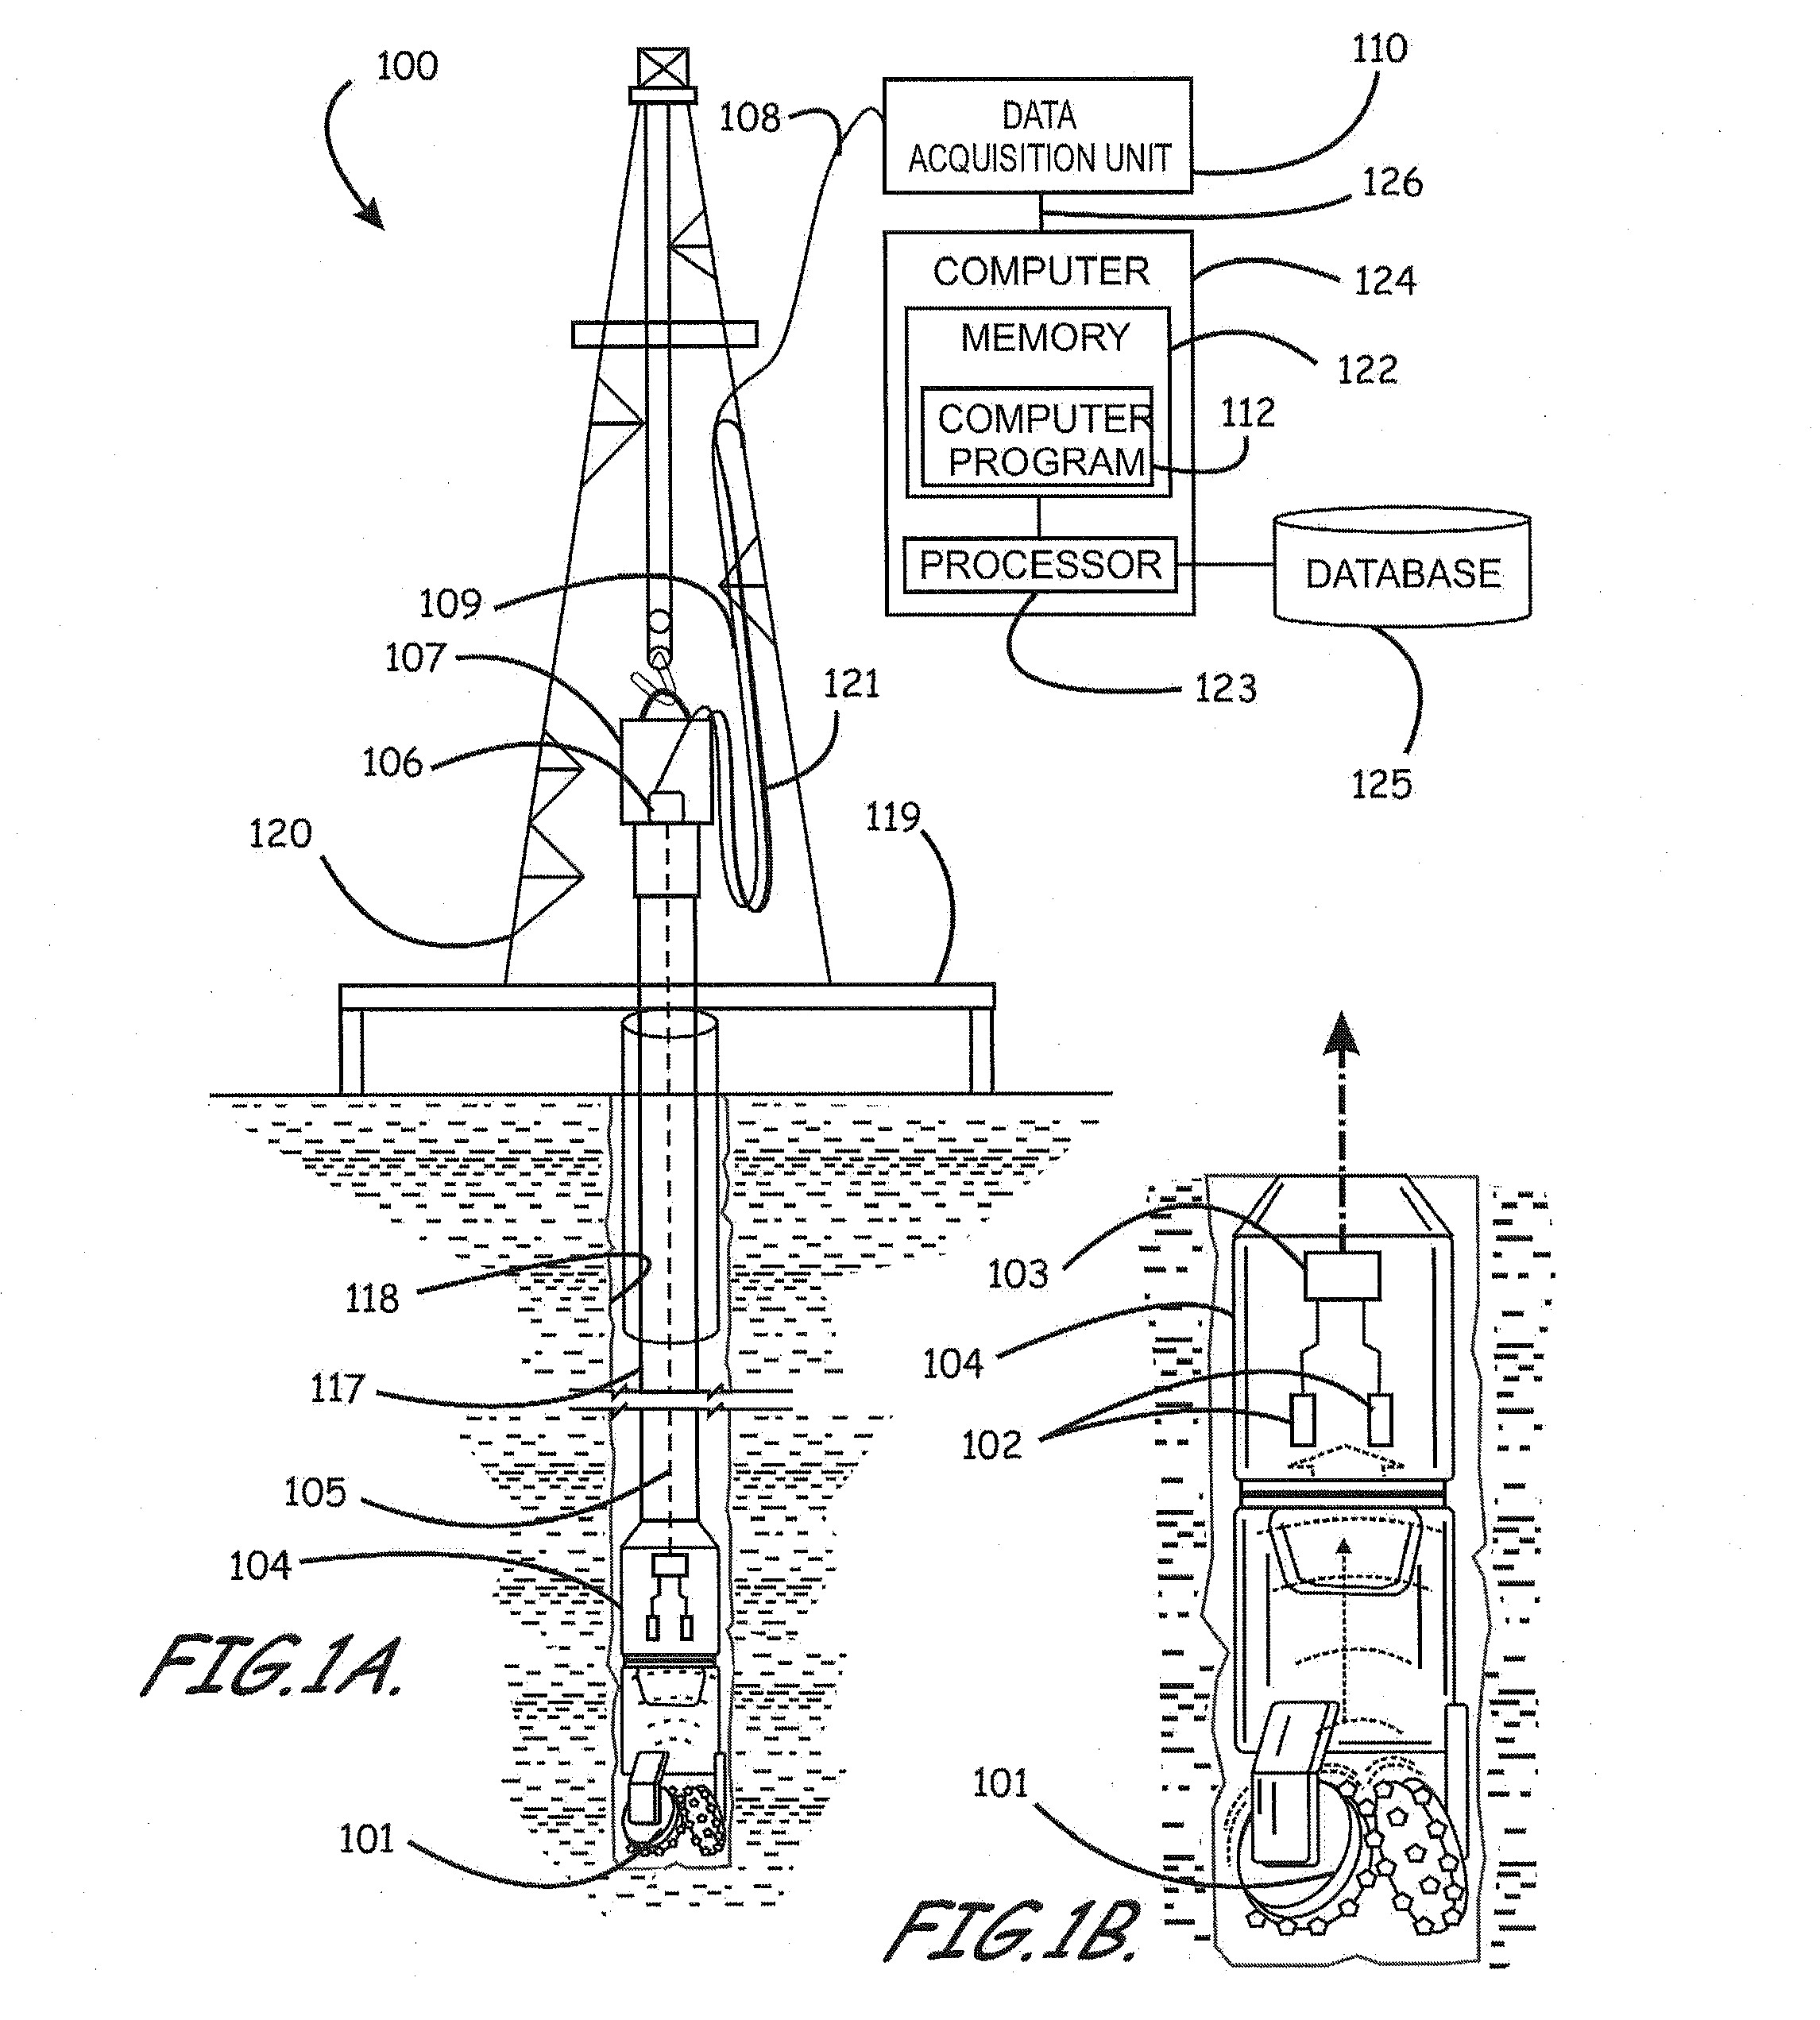 Methods of evaluating rock properties while drilling using downhole acoustic sensors and a downhole broadband transmitting system